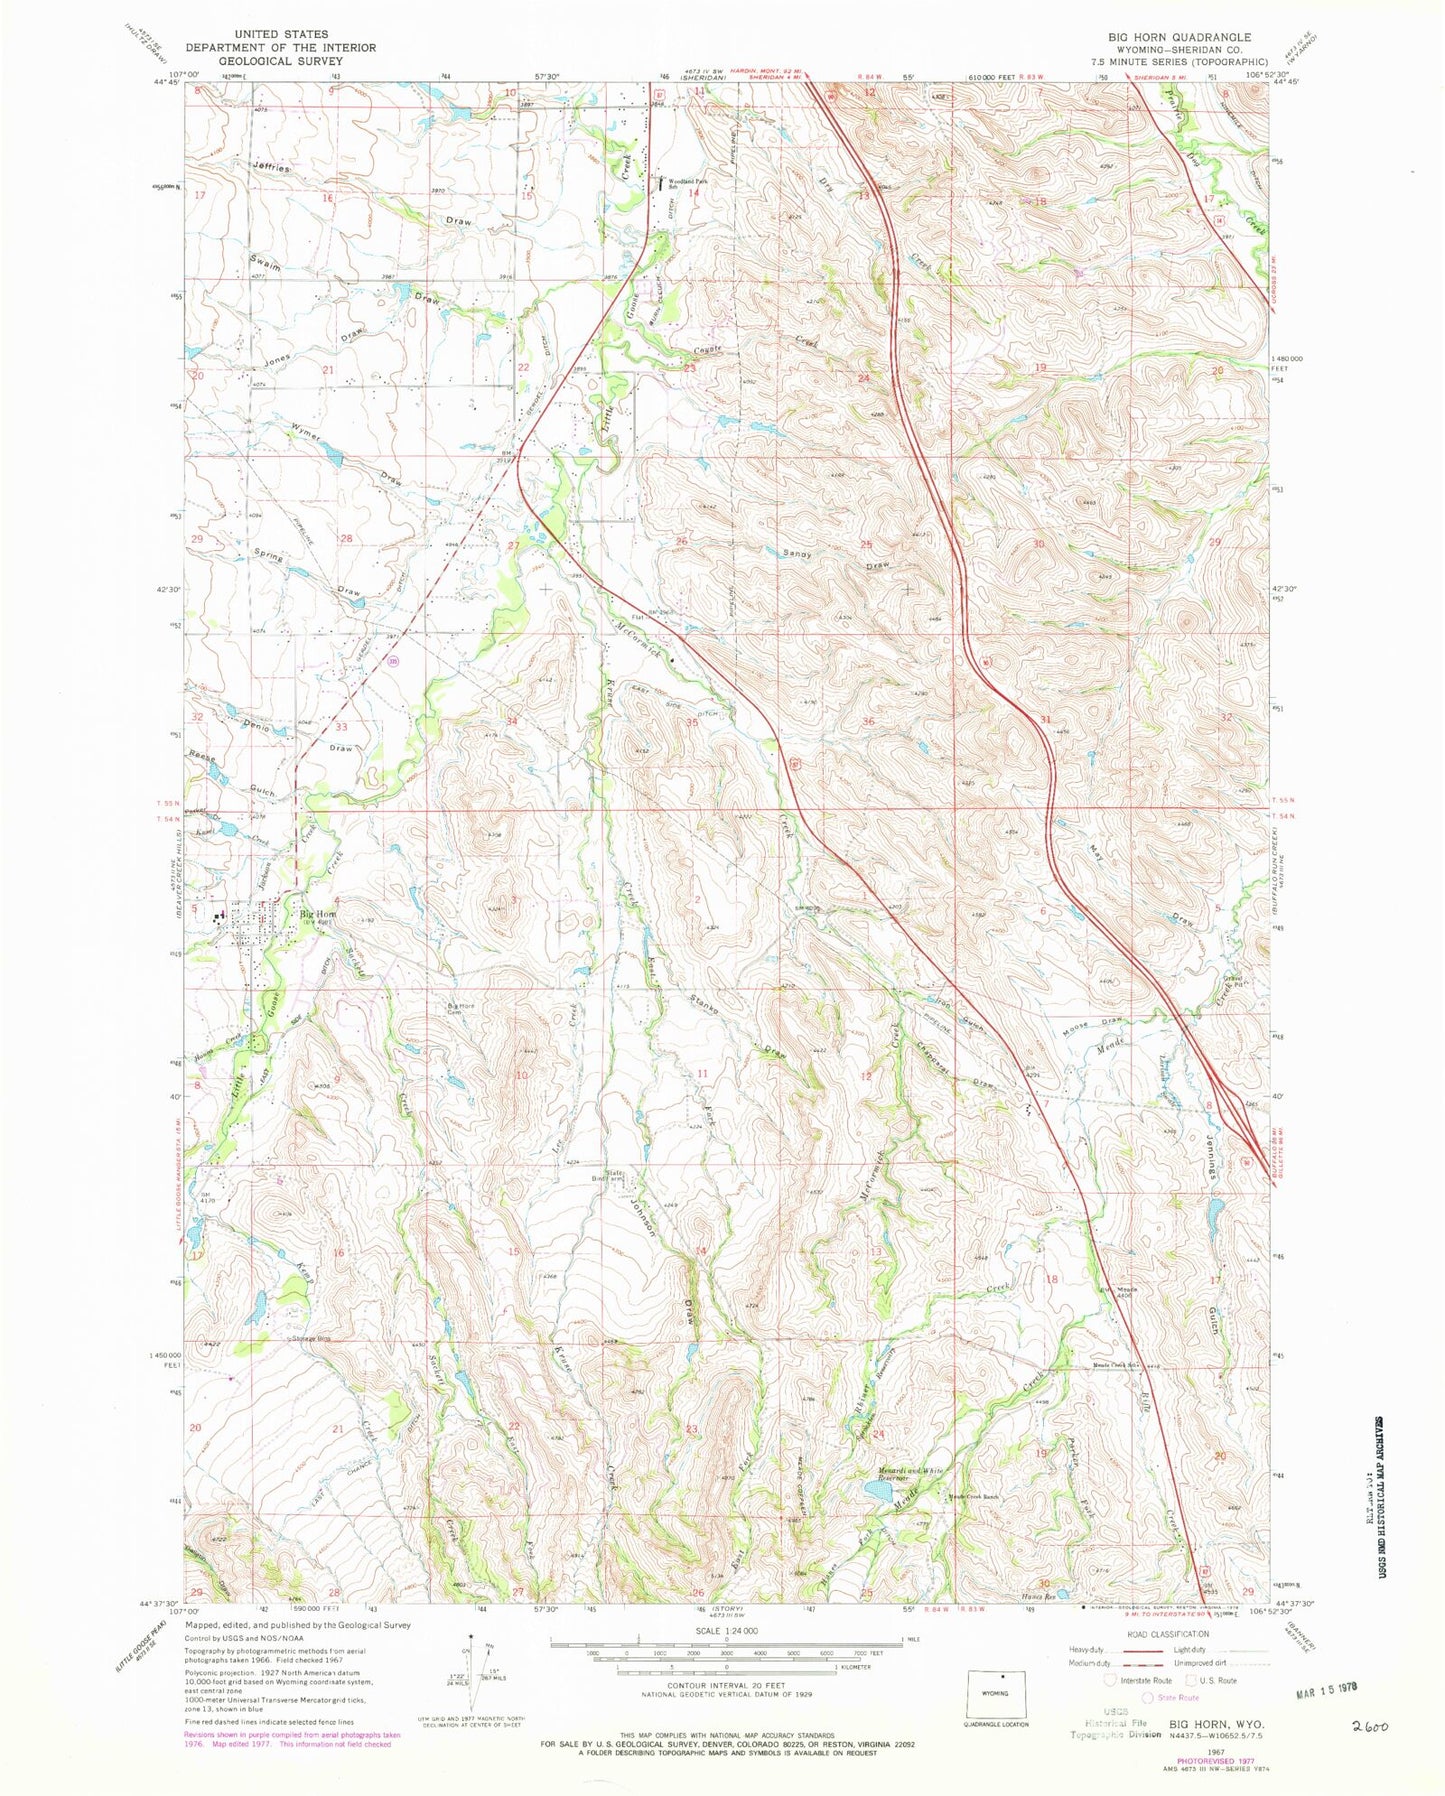 Classic USGS Big Horn Wyoming 7.5'x7.5' Topo Map Image